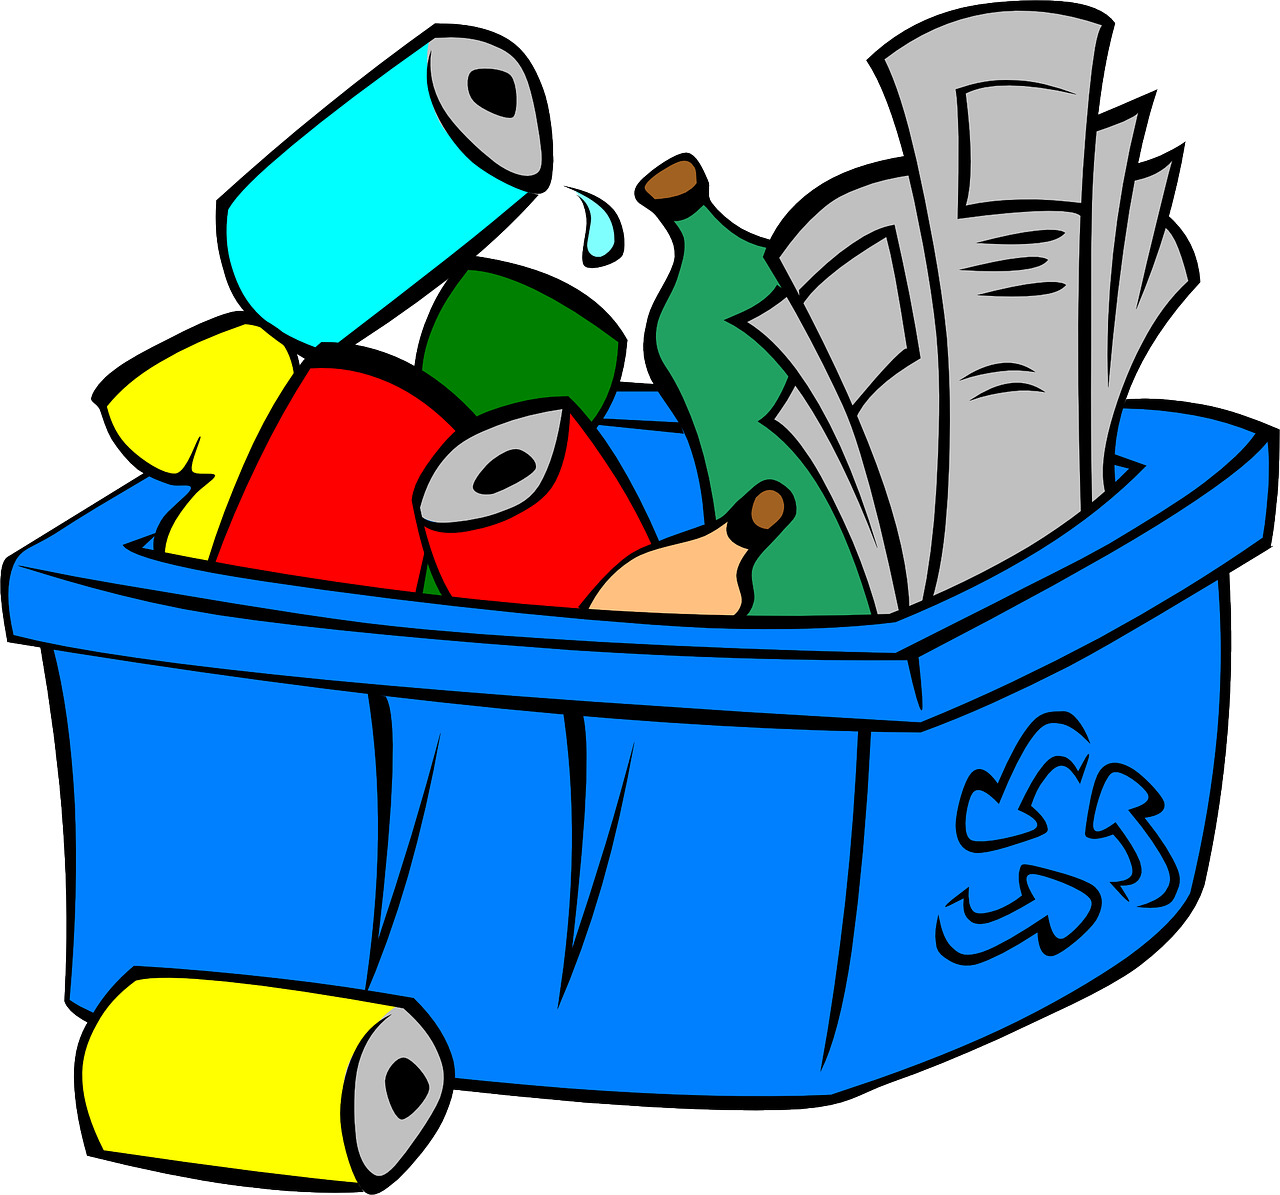 Recycling Science Materials Bins Garbage Free Transparent Image HD PNG Image